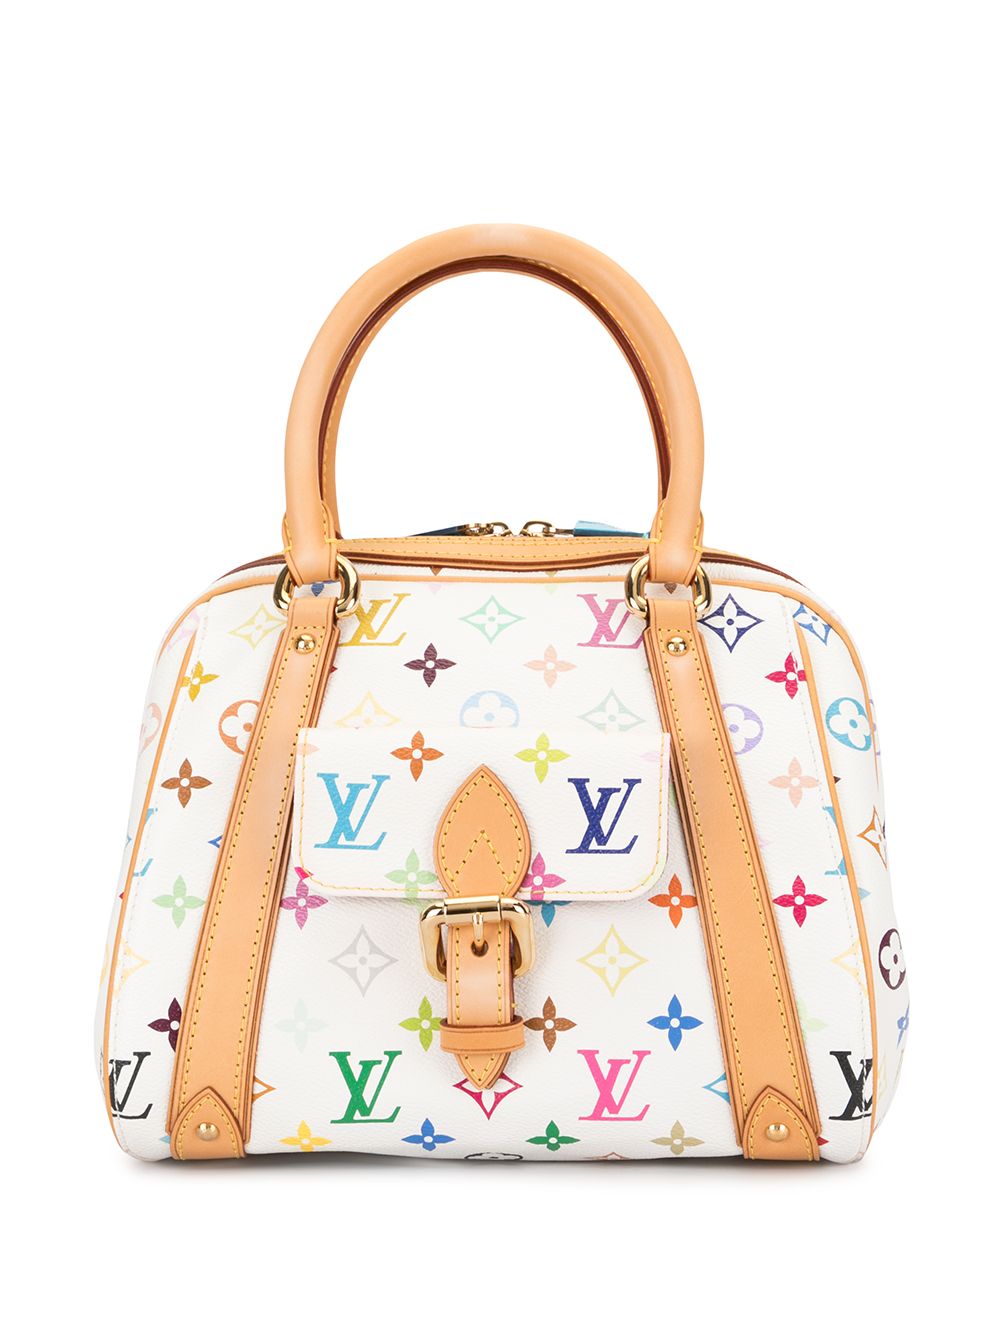 The hand bag Louis Vuitton of Saweetie on the account Instagram of